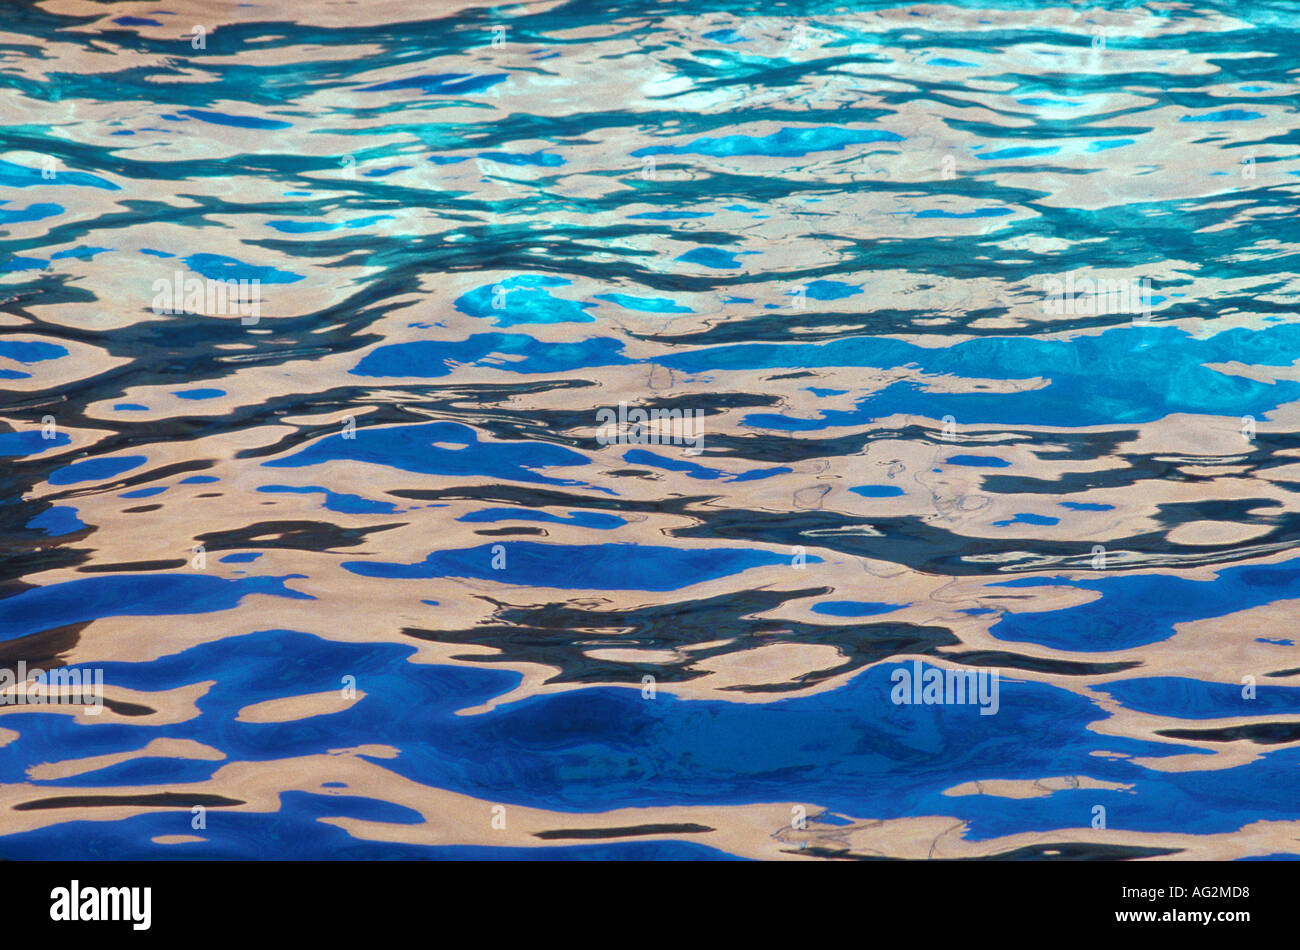 Abstract water pattern Stock Photo